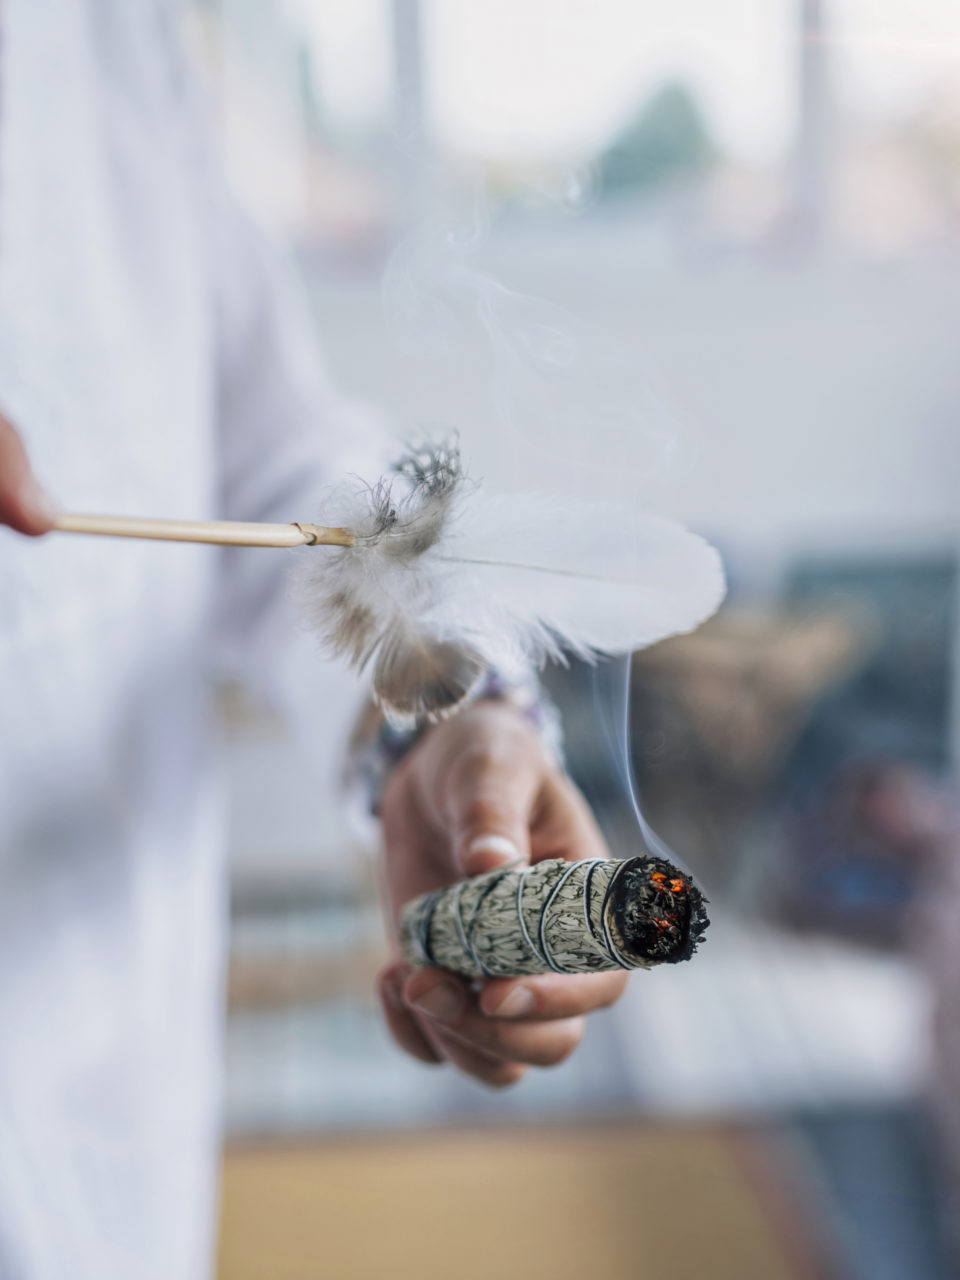 https://www.planetavenue.com/wp-content/uploads/2022/10/smudging-or-space-cleansing-with-sage-for-removal-2021-08-27-09-29-59-utc-960x1280.jpg